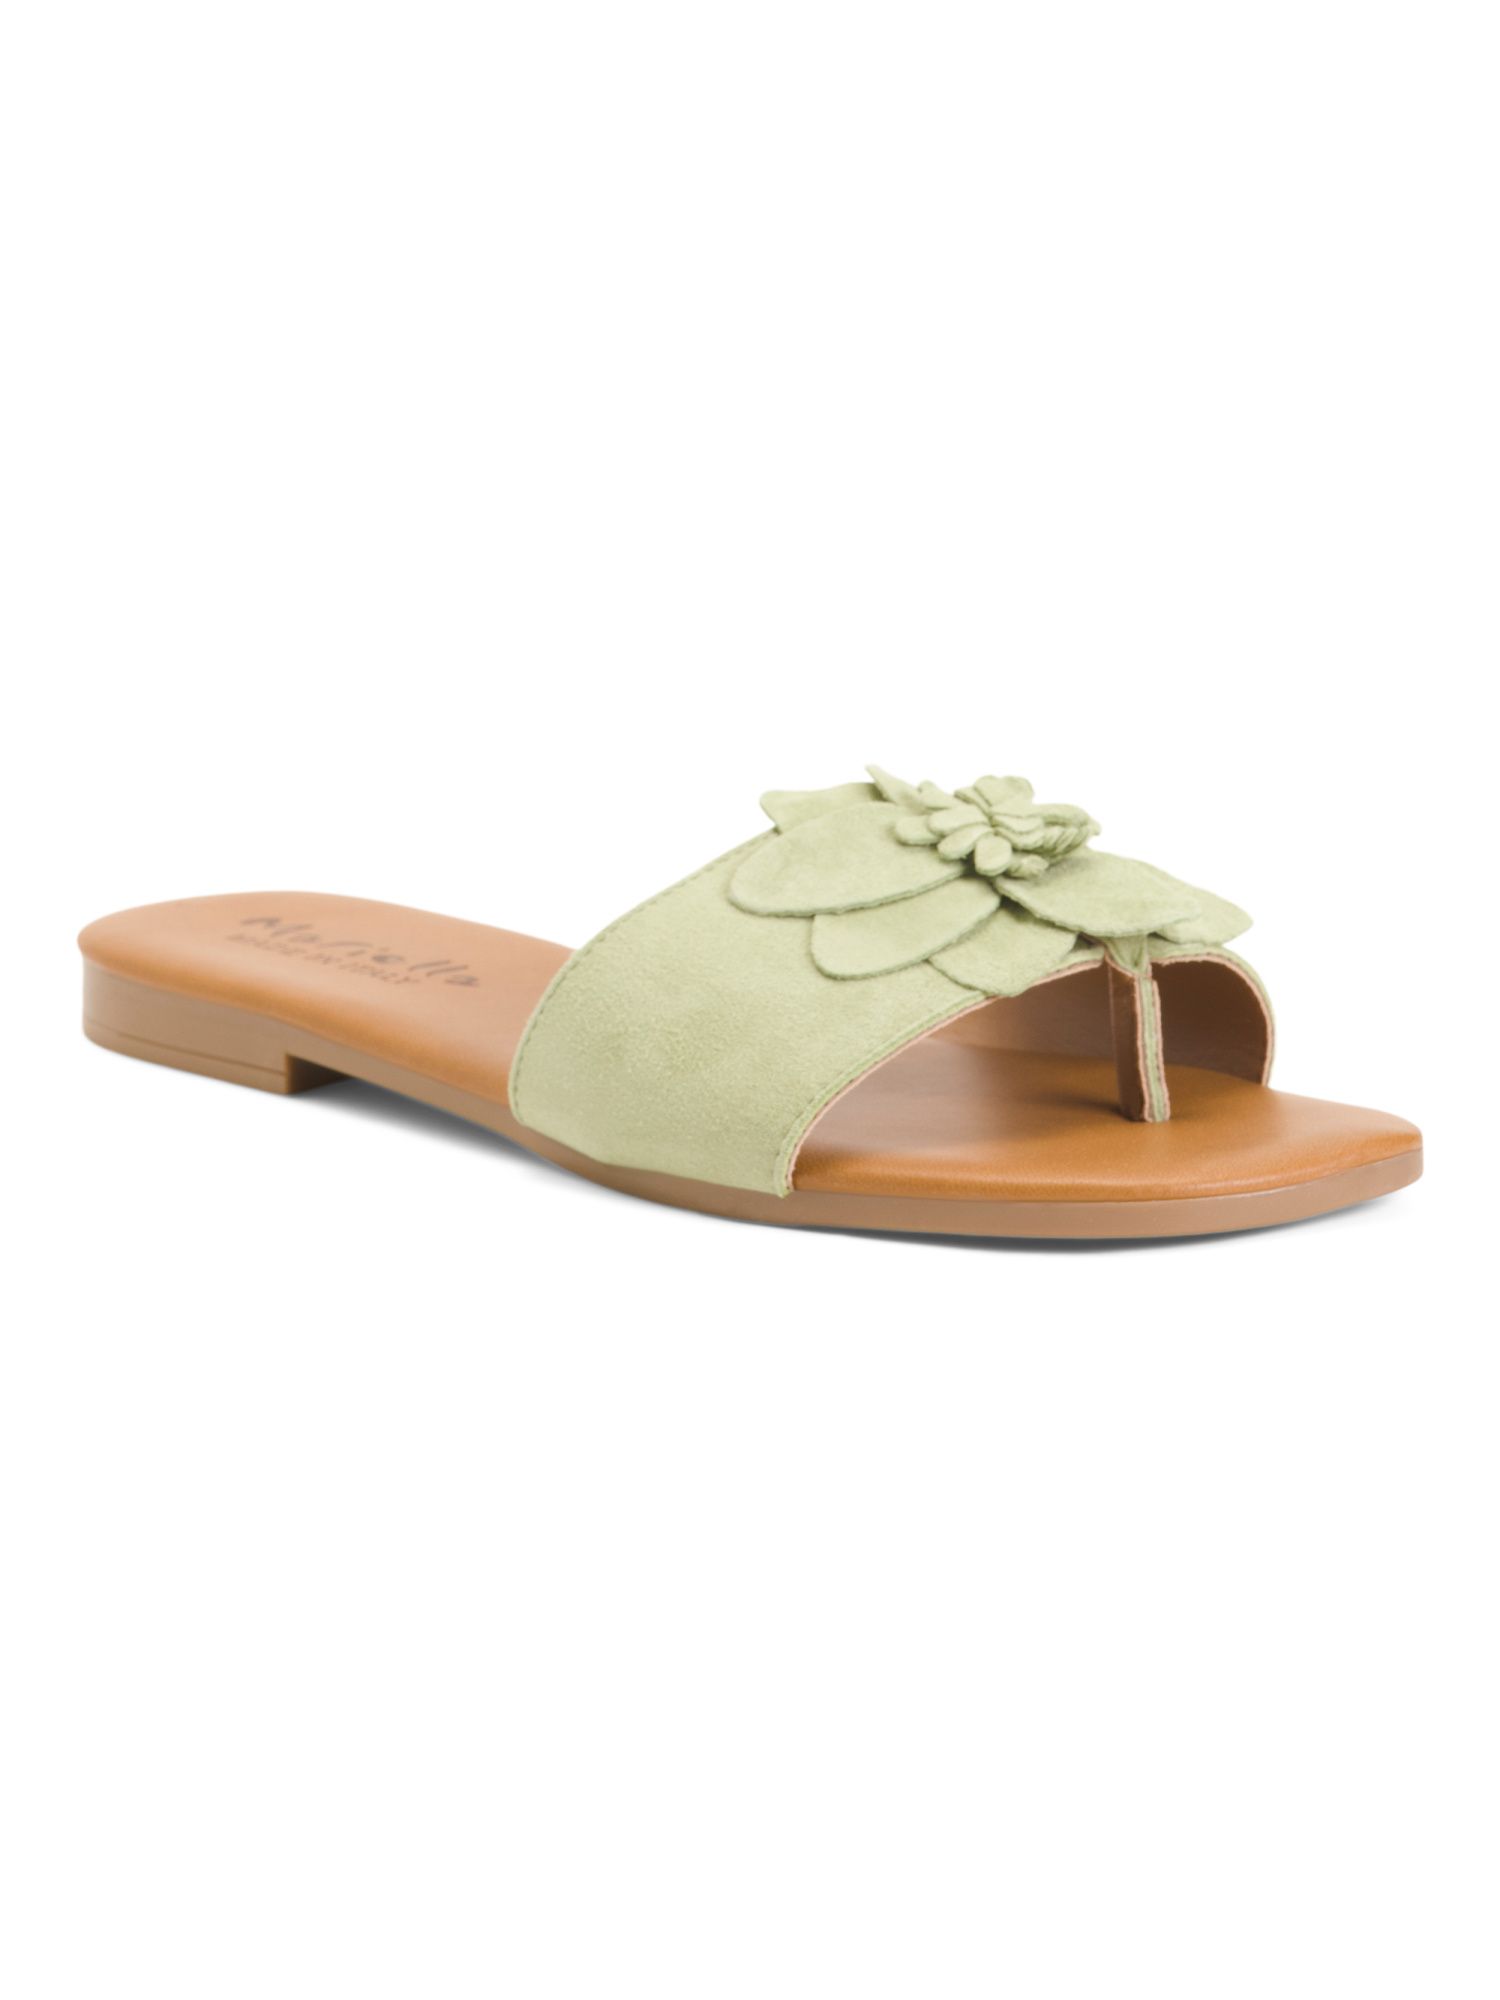 Made In Italy Suede Sandals With Flower | Women's Shoes | Marshalls | Marshalls